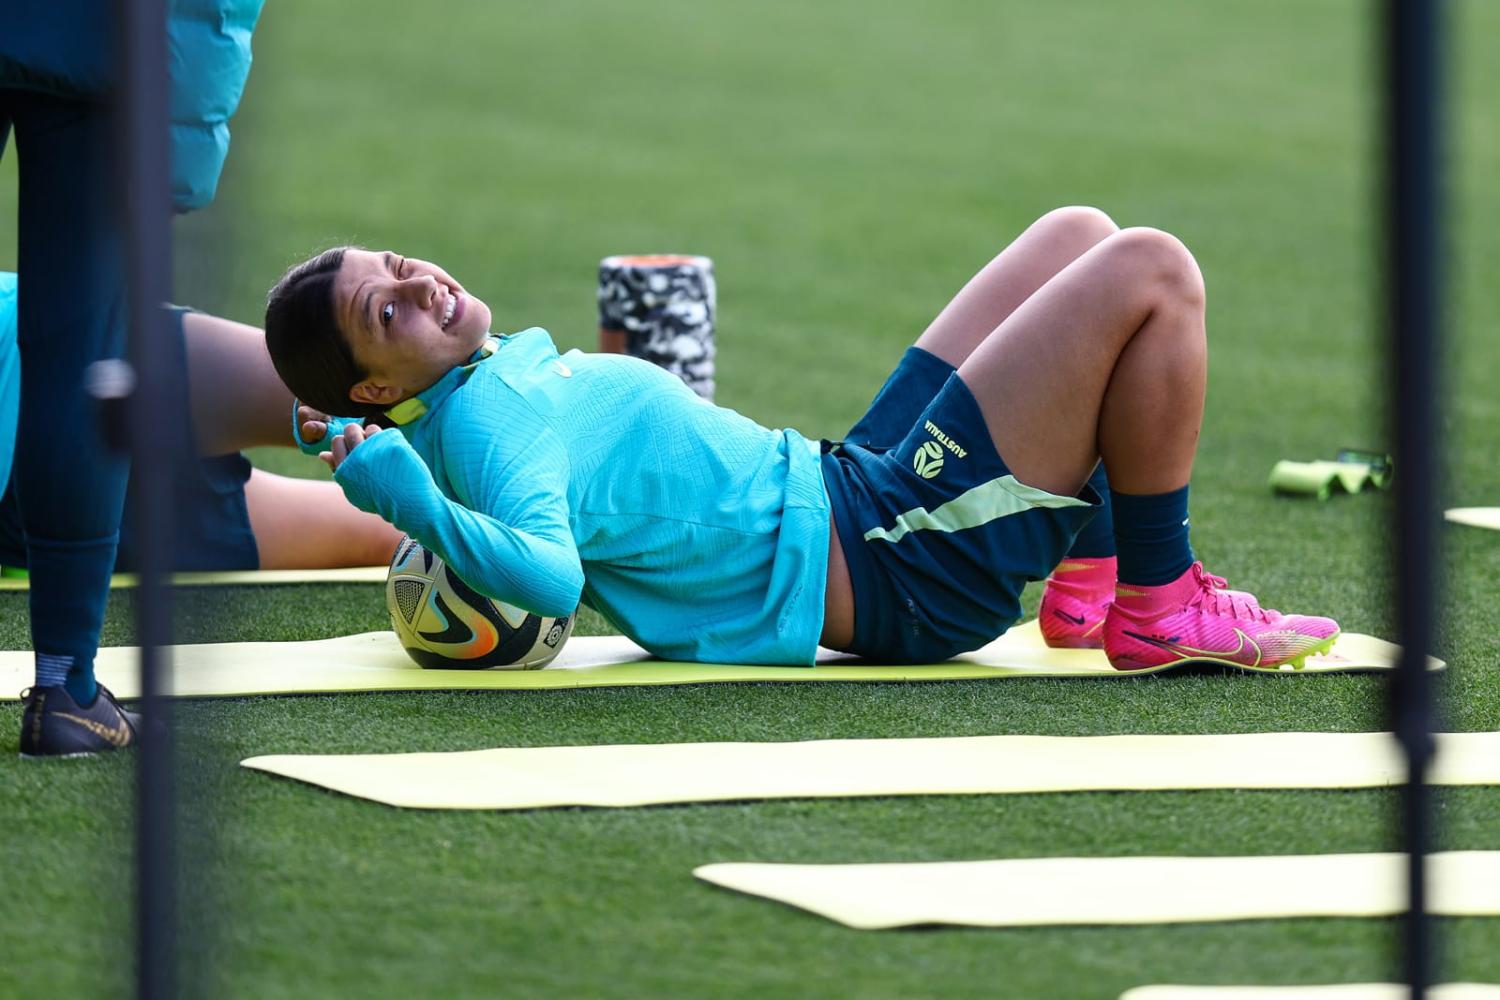 Sam Kerr stretches during an Australian Matildas training session in Sydney ahead of the FIFA Women's World Cup semi-final against England on Wednesday (Charlotte Wilson/Offside via Getty Images)